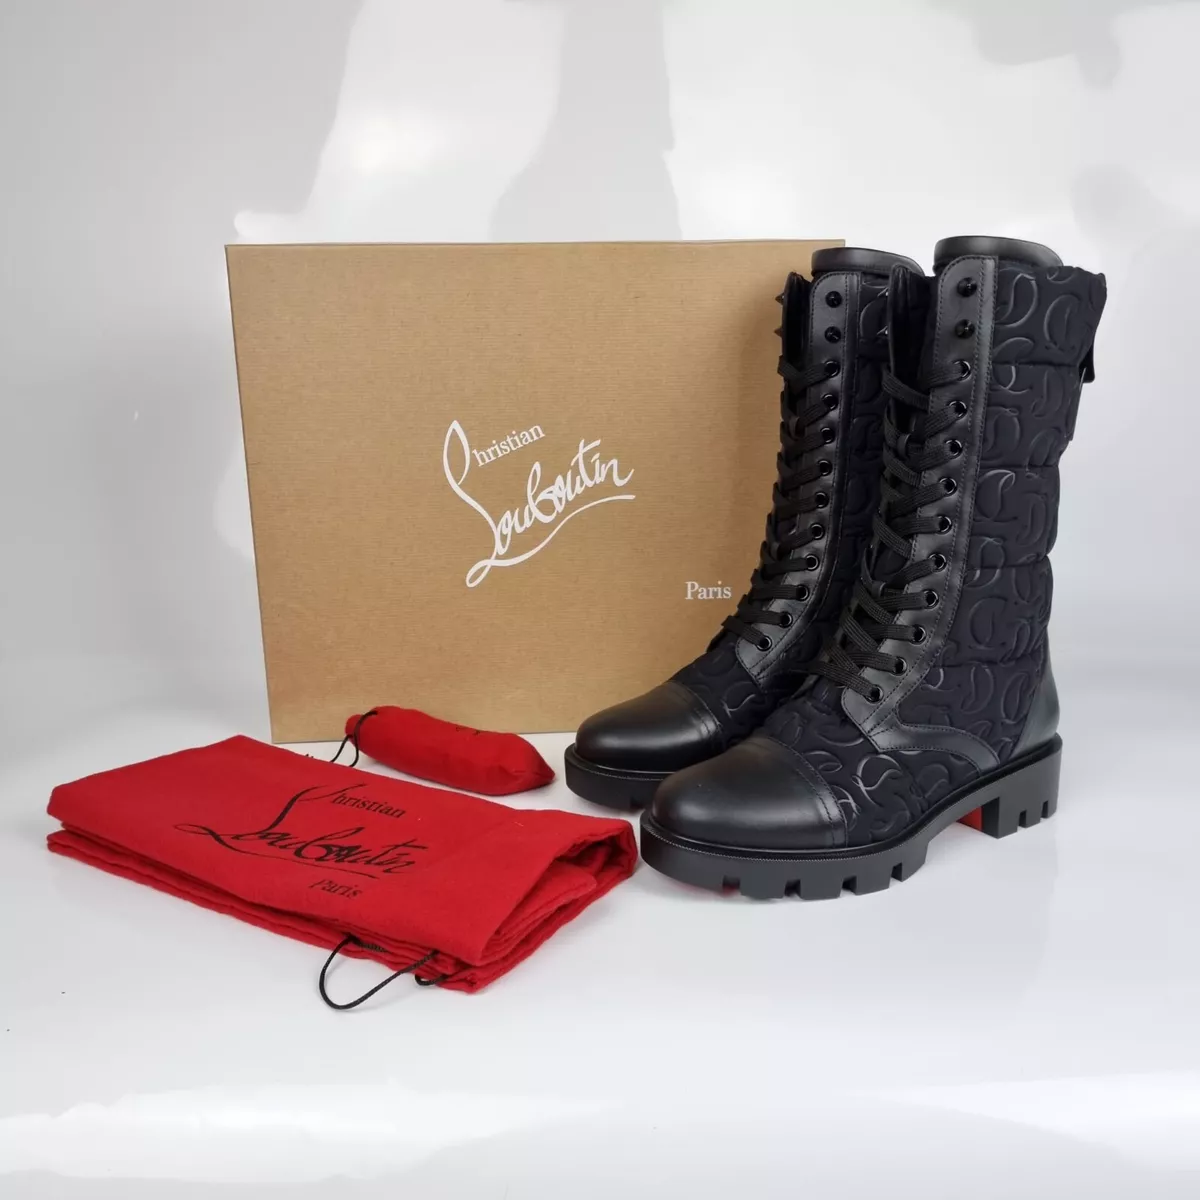 Christian Louboutin Pavleta Leather-trimmed Quilted Shell Boots